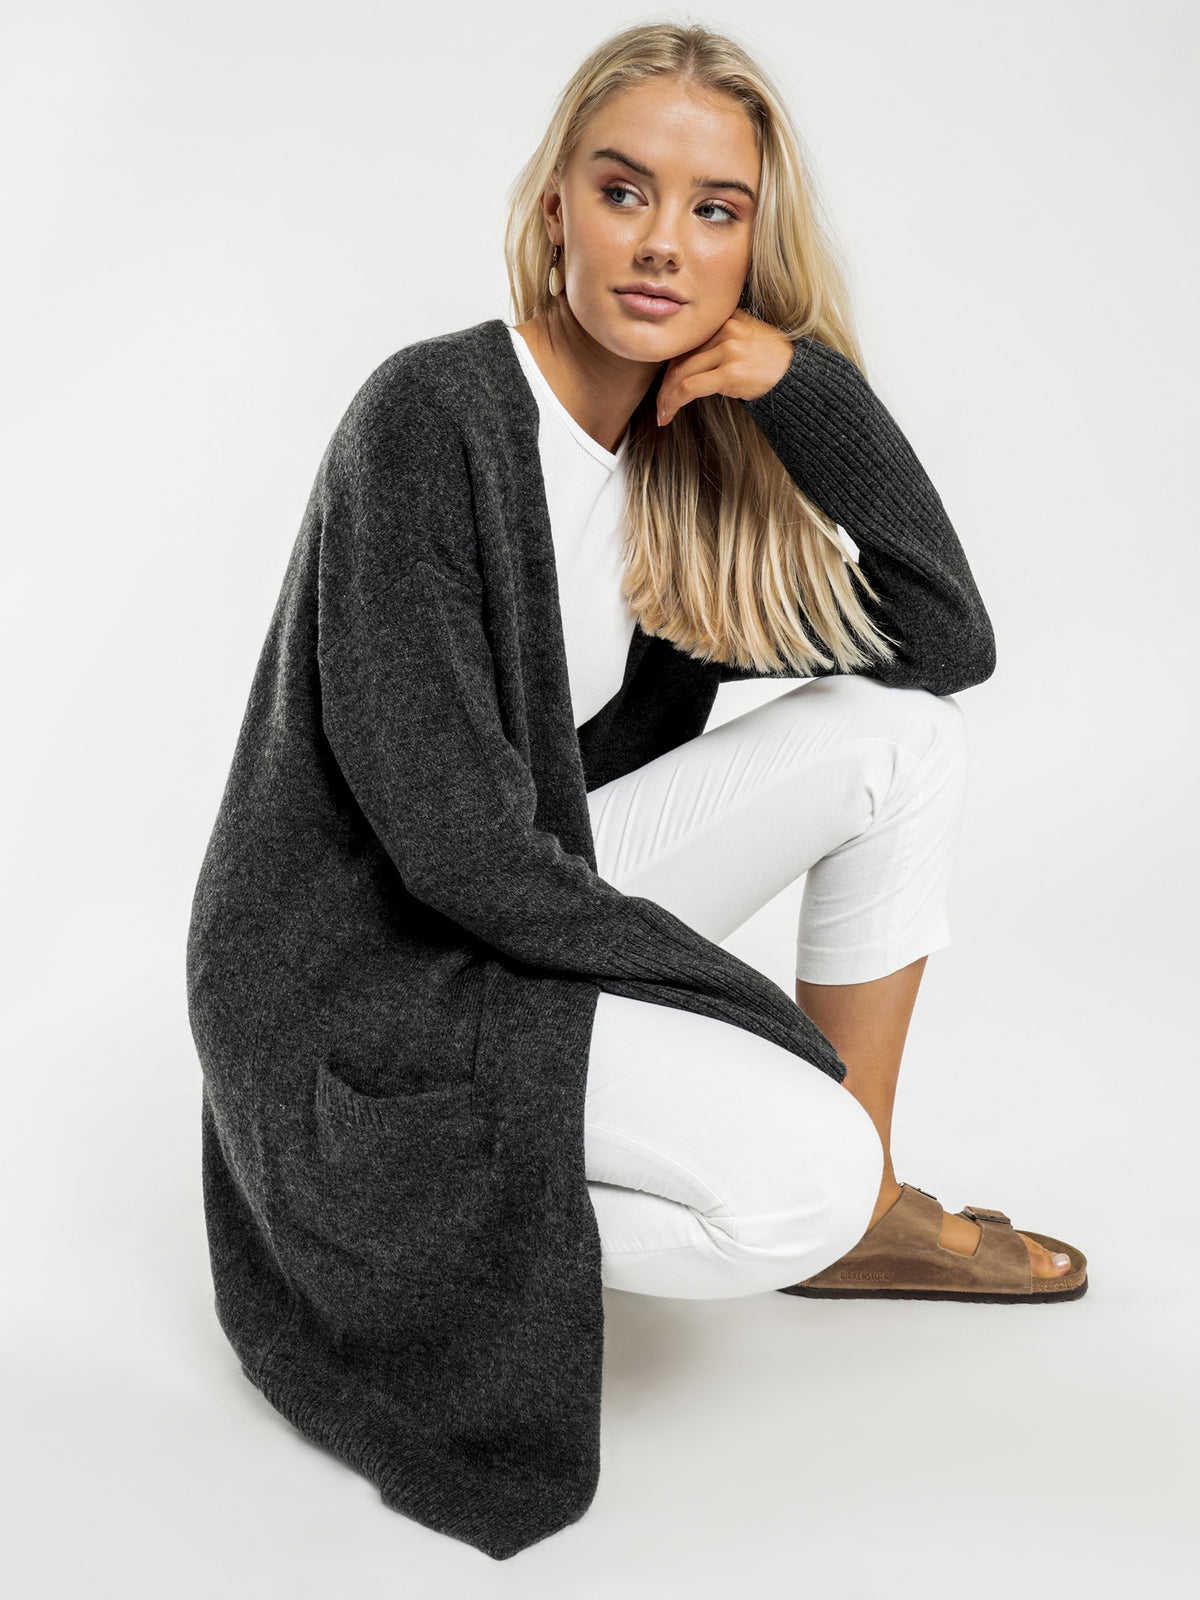 Avery Cardigan in Charcoal